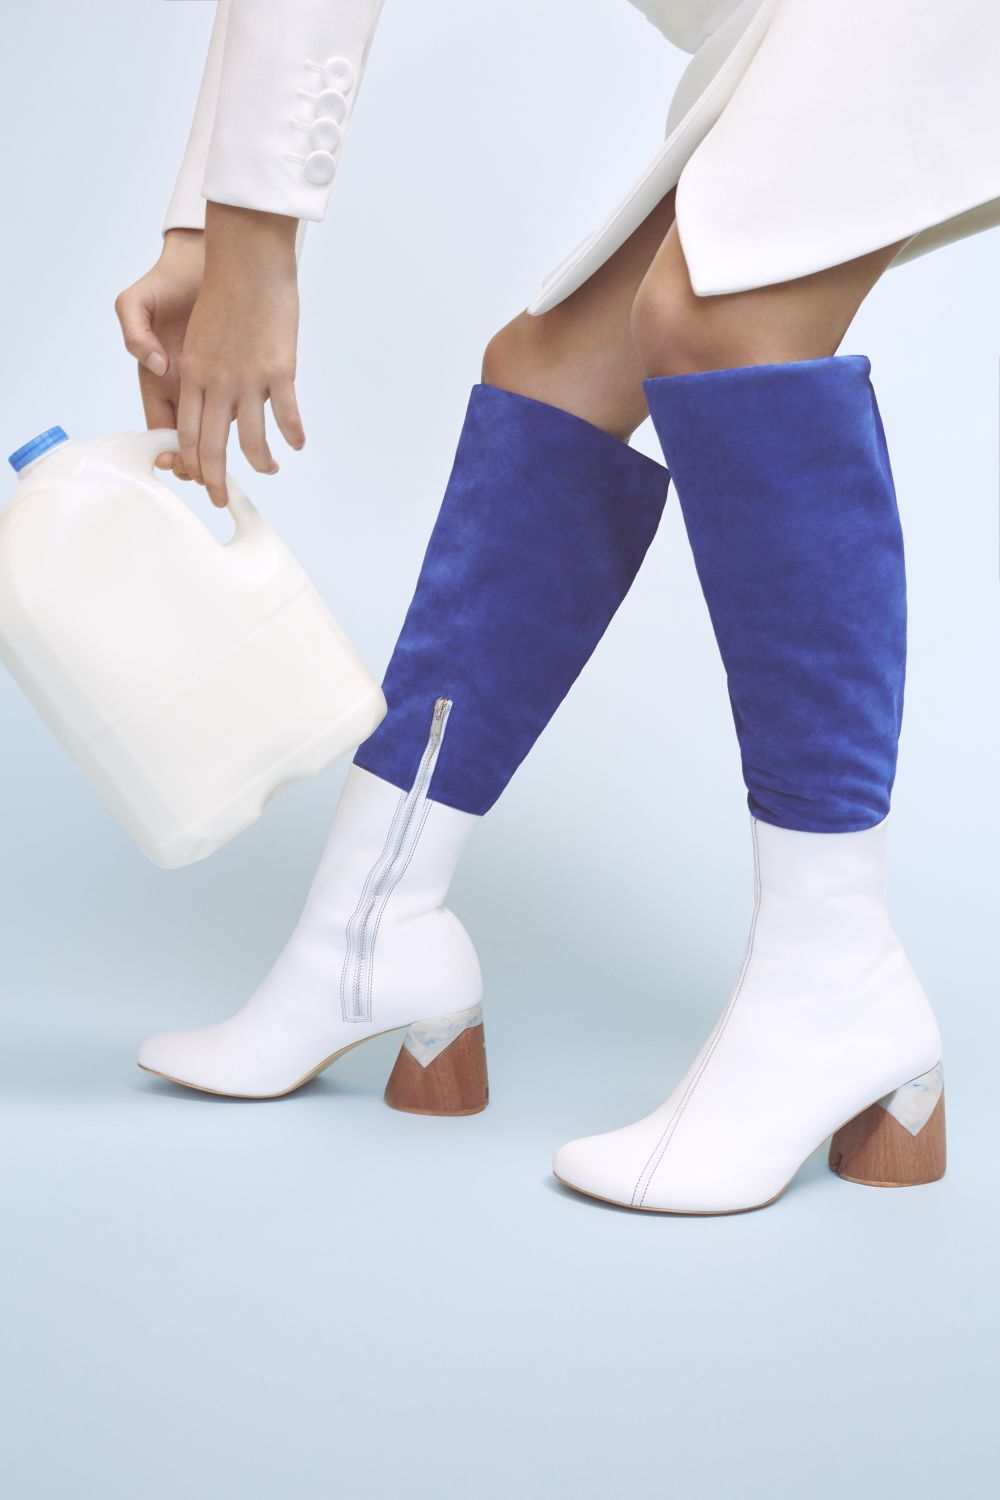 Image of white leather heeled boots worn with colbalt blue trousers and matching white hand bag